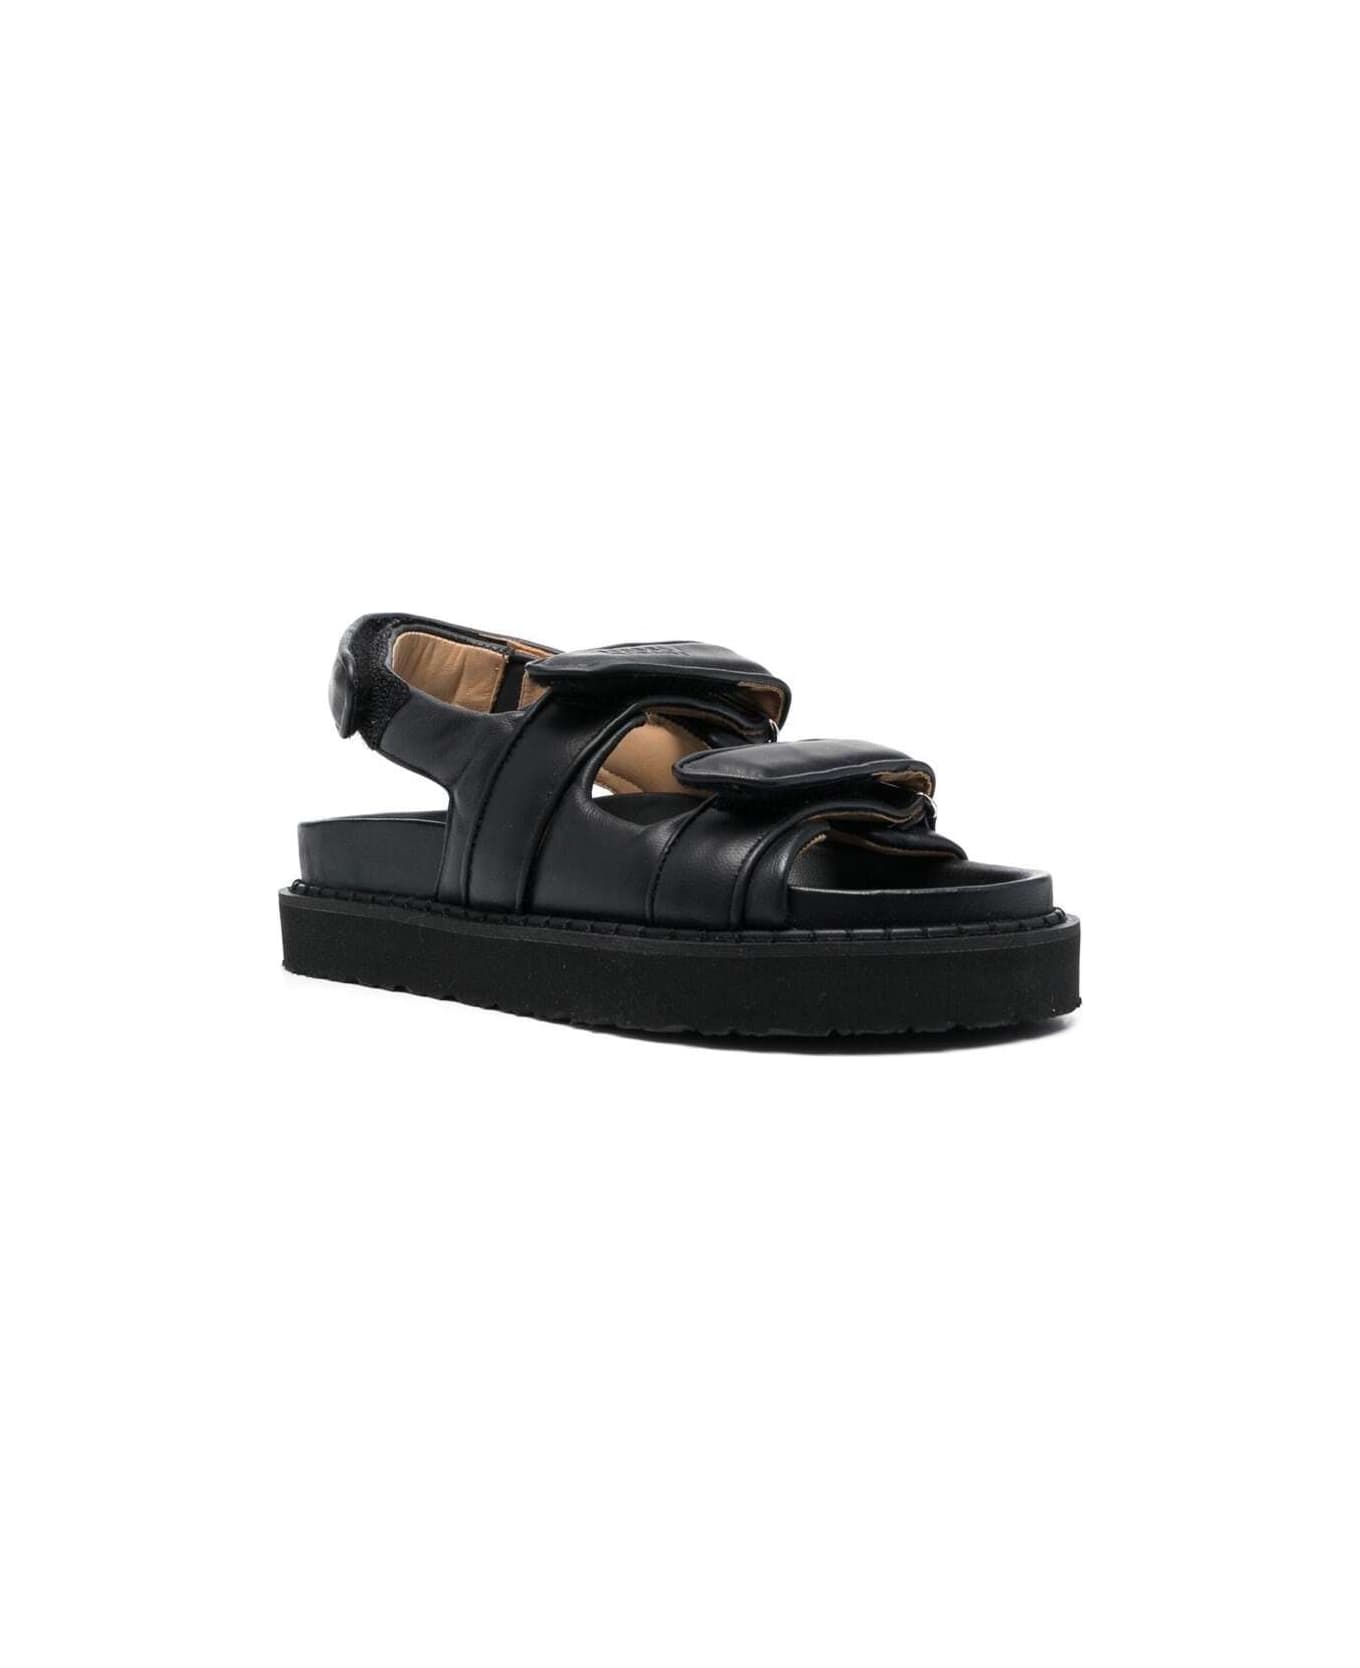 Isabel Marant Black Touch-strap Platform Sandals In Leather Woman - Black サンダル